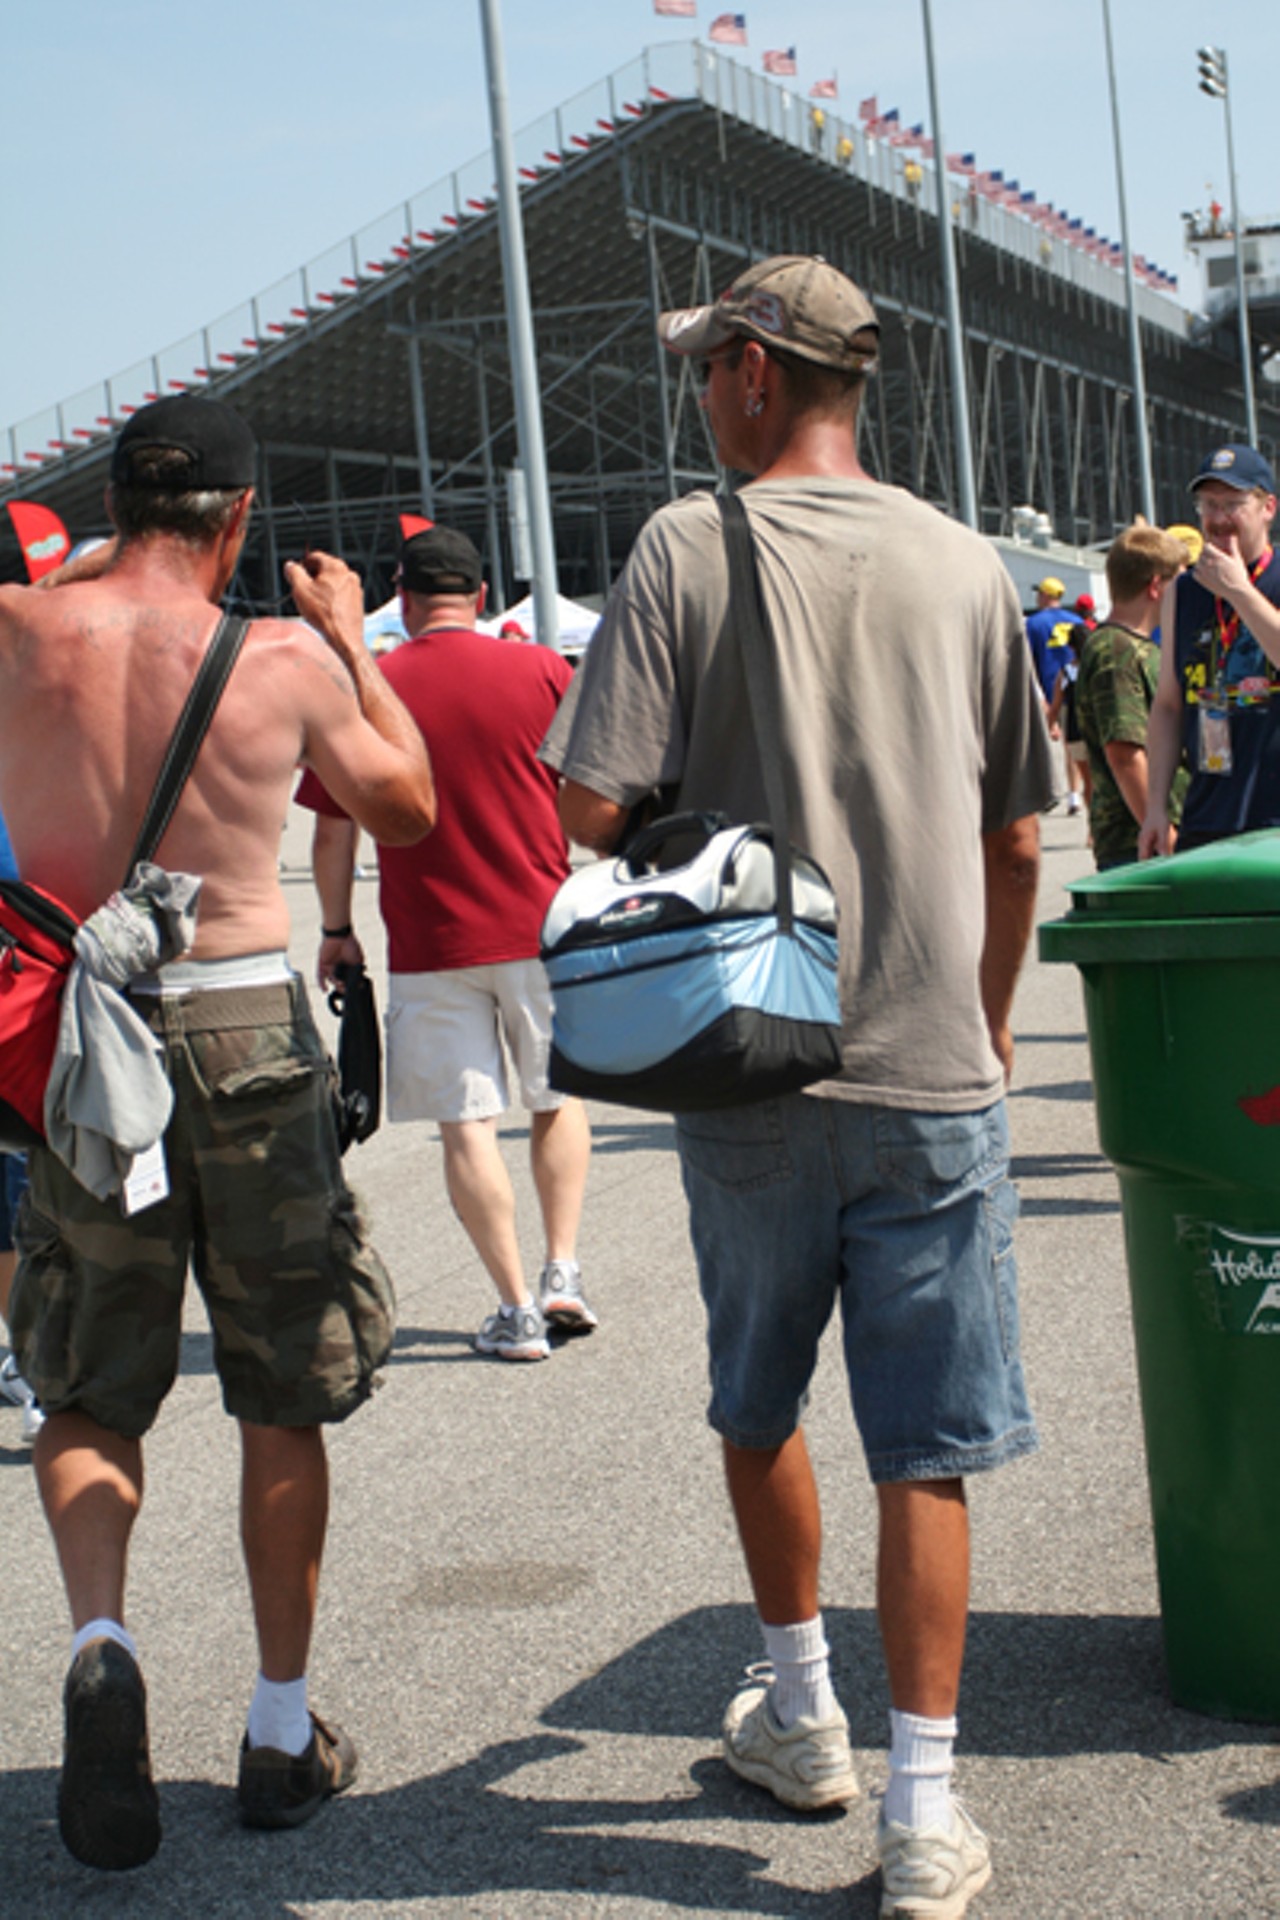 So I finally walk through the gates and I hear a beer can get tossed into the metal trashcan, the woman taking the tickets says, &ldquo;honey, you coulda brought that beer in with you.&rdquo; The Raceway is A.O.K with B.Y.O.B., which brings me to the most prominent fashion accessory of the day, the mini cooler man purse.